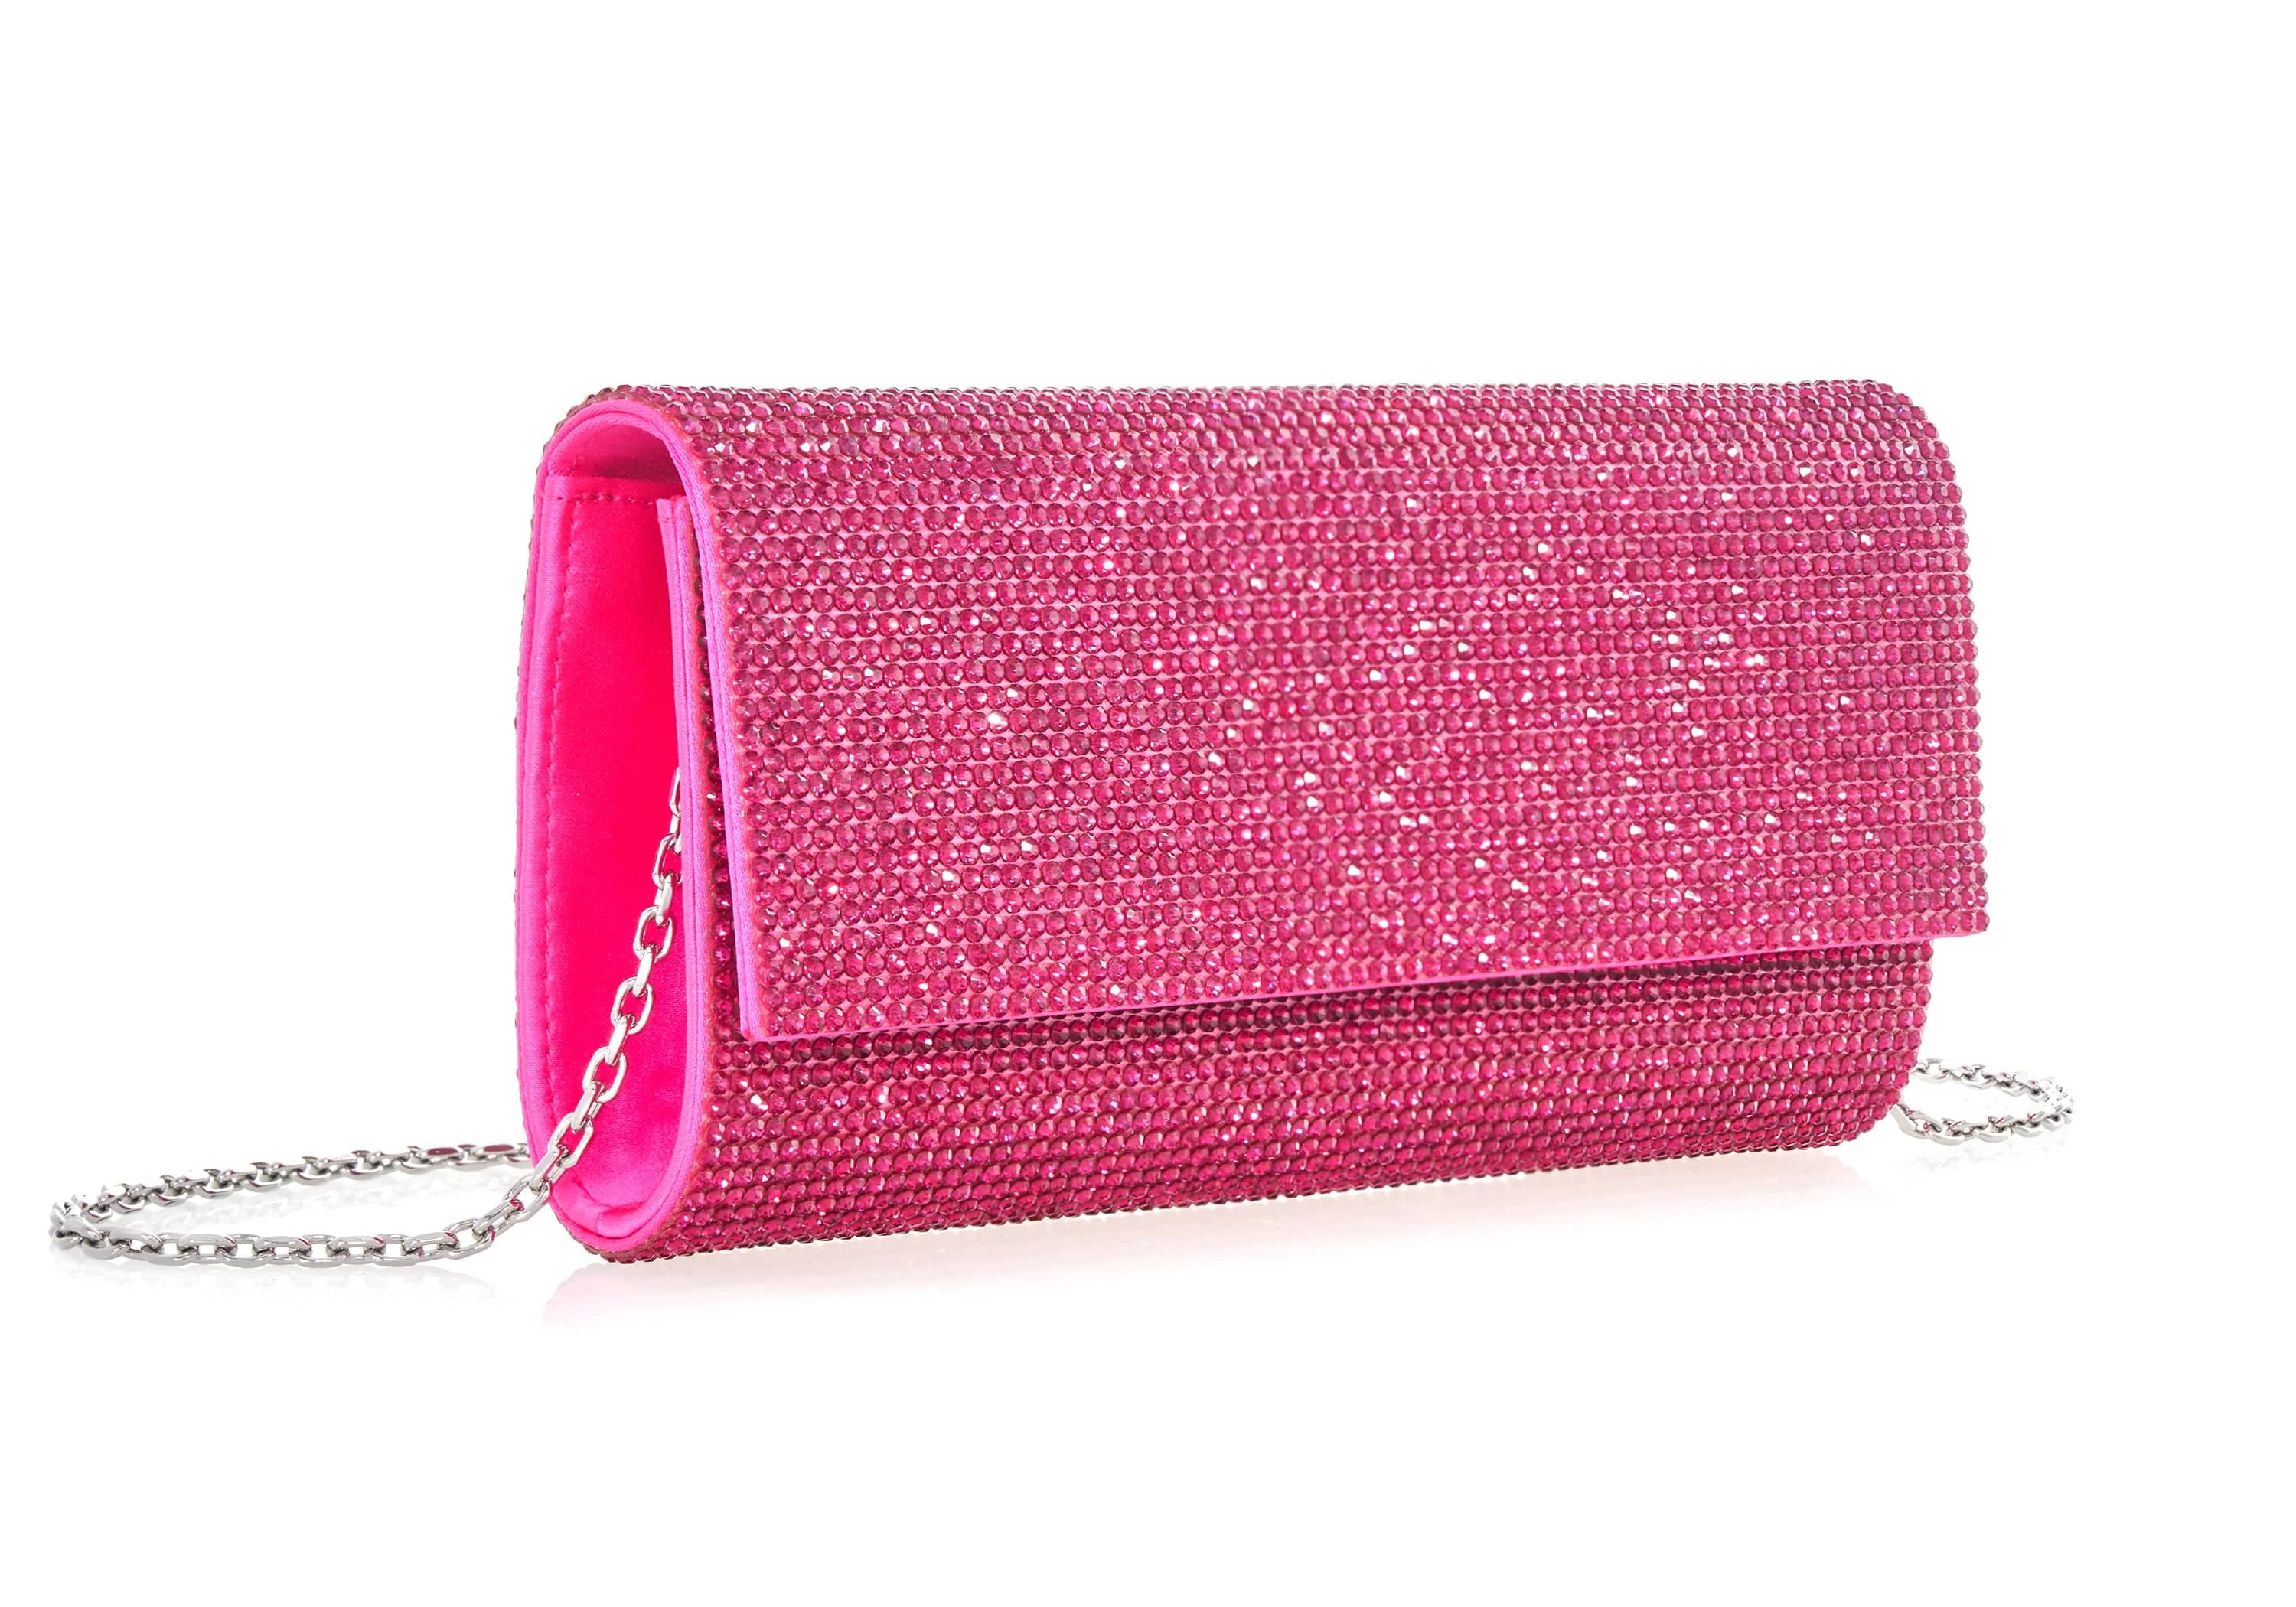 Baby Pink Clutch Bags Indian Bags Gifts For Women Clutch Purse Unique  Designer | eBay